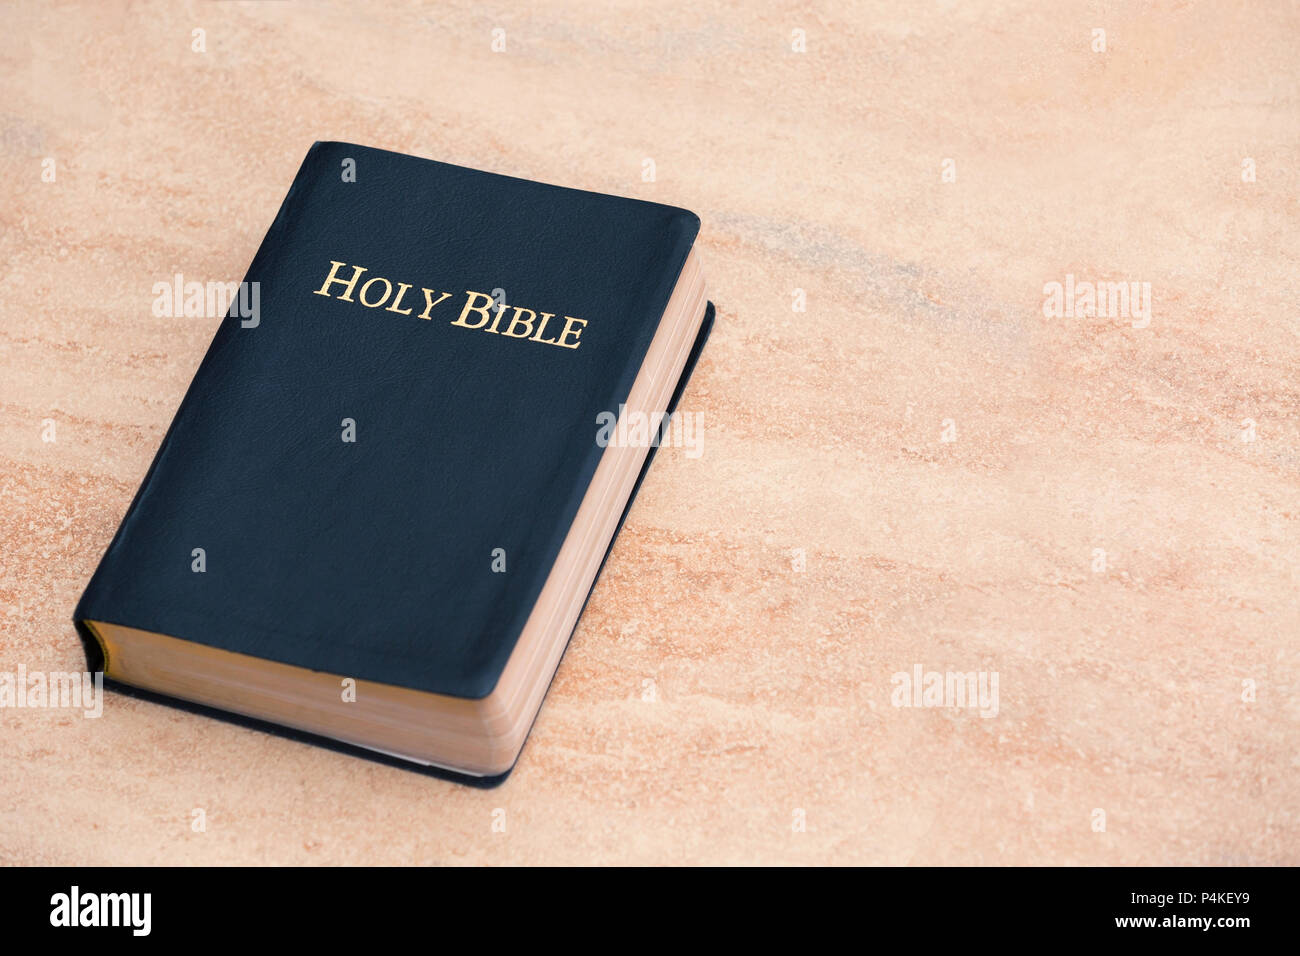 Top View of Holy Bible on Sandstone Stock Photo